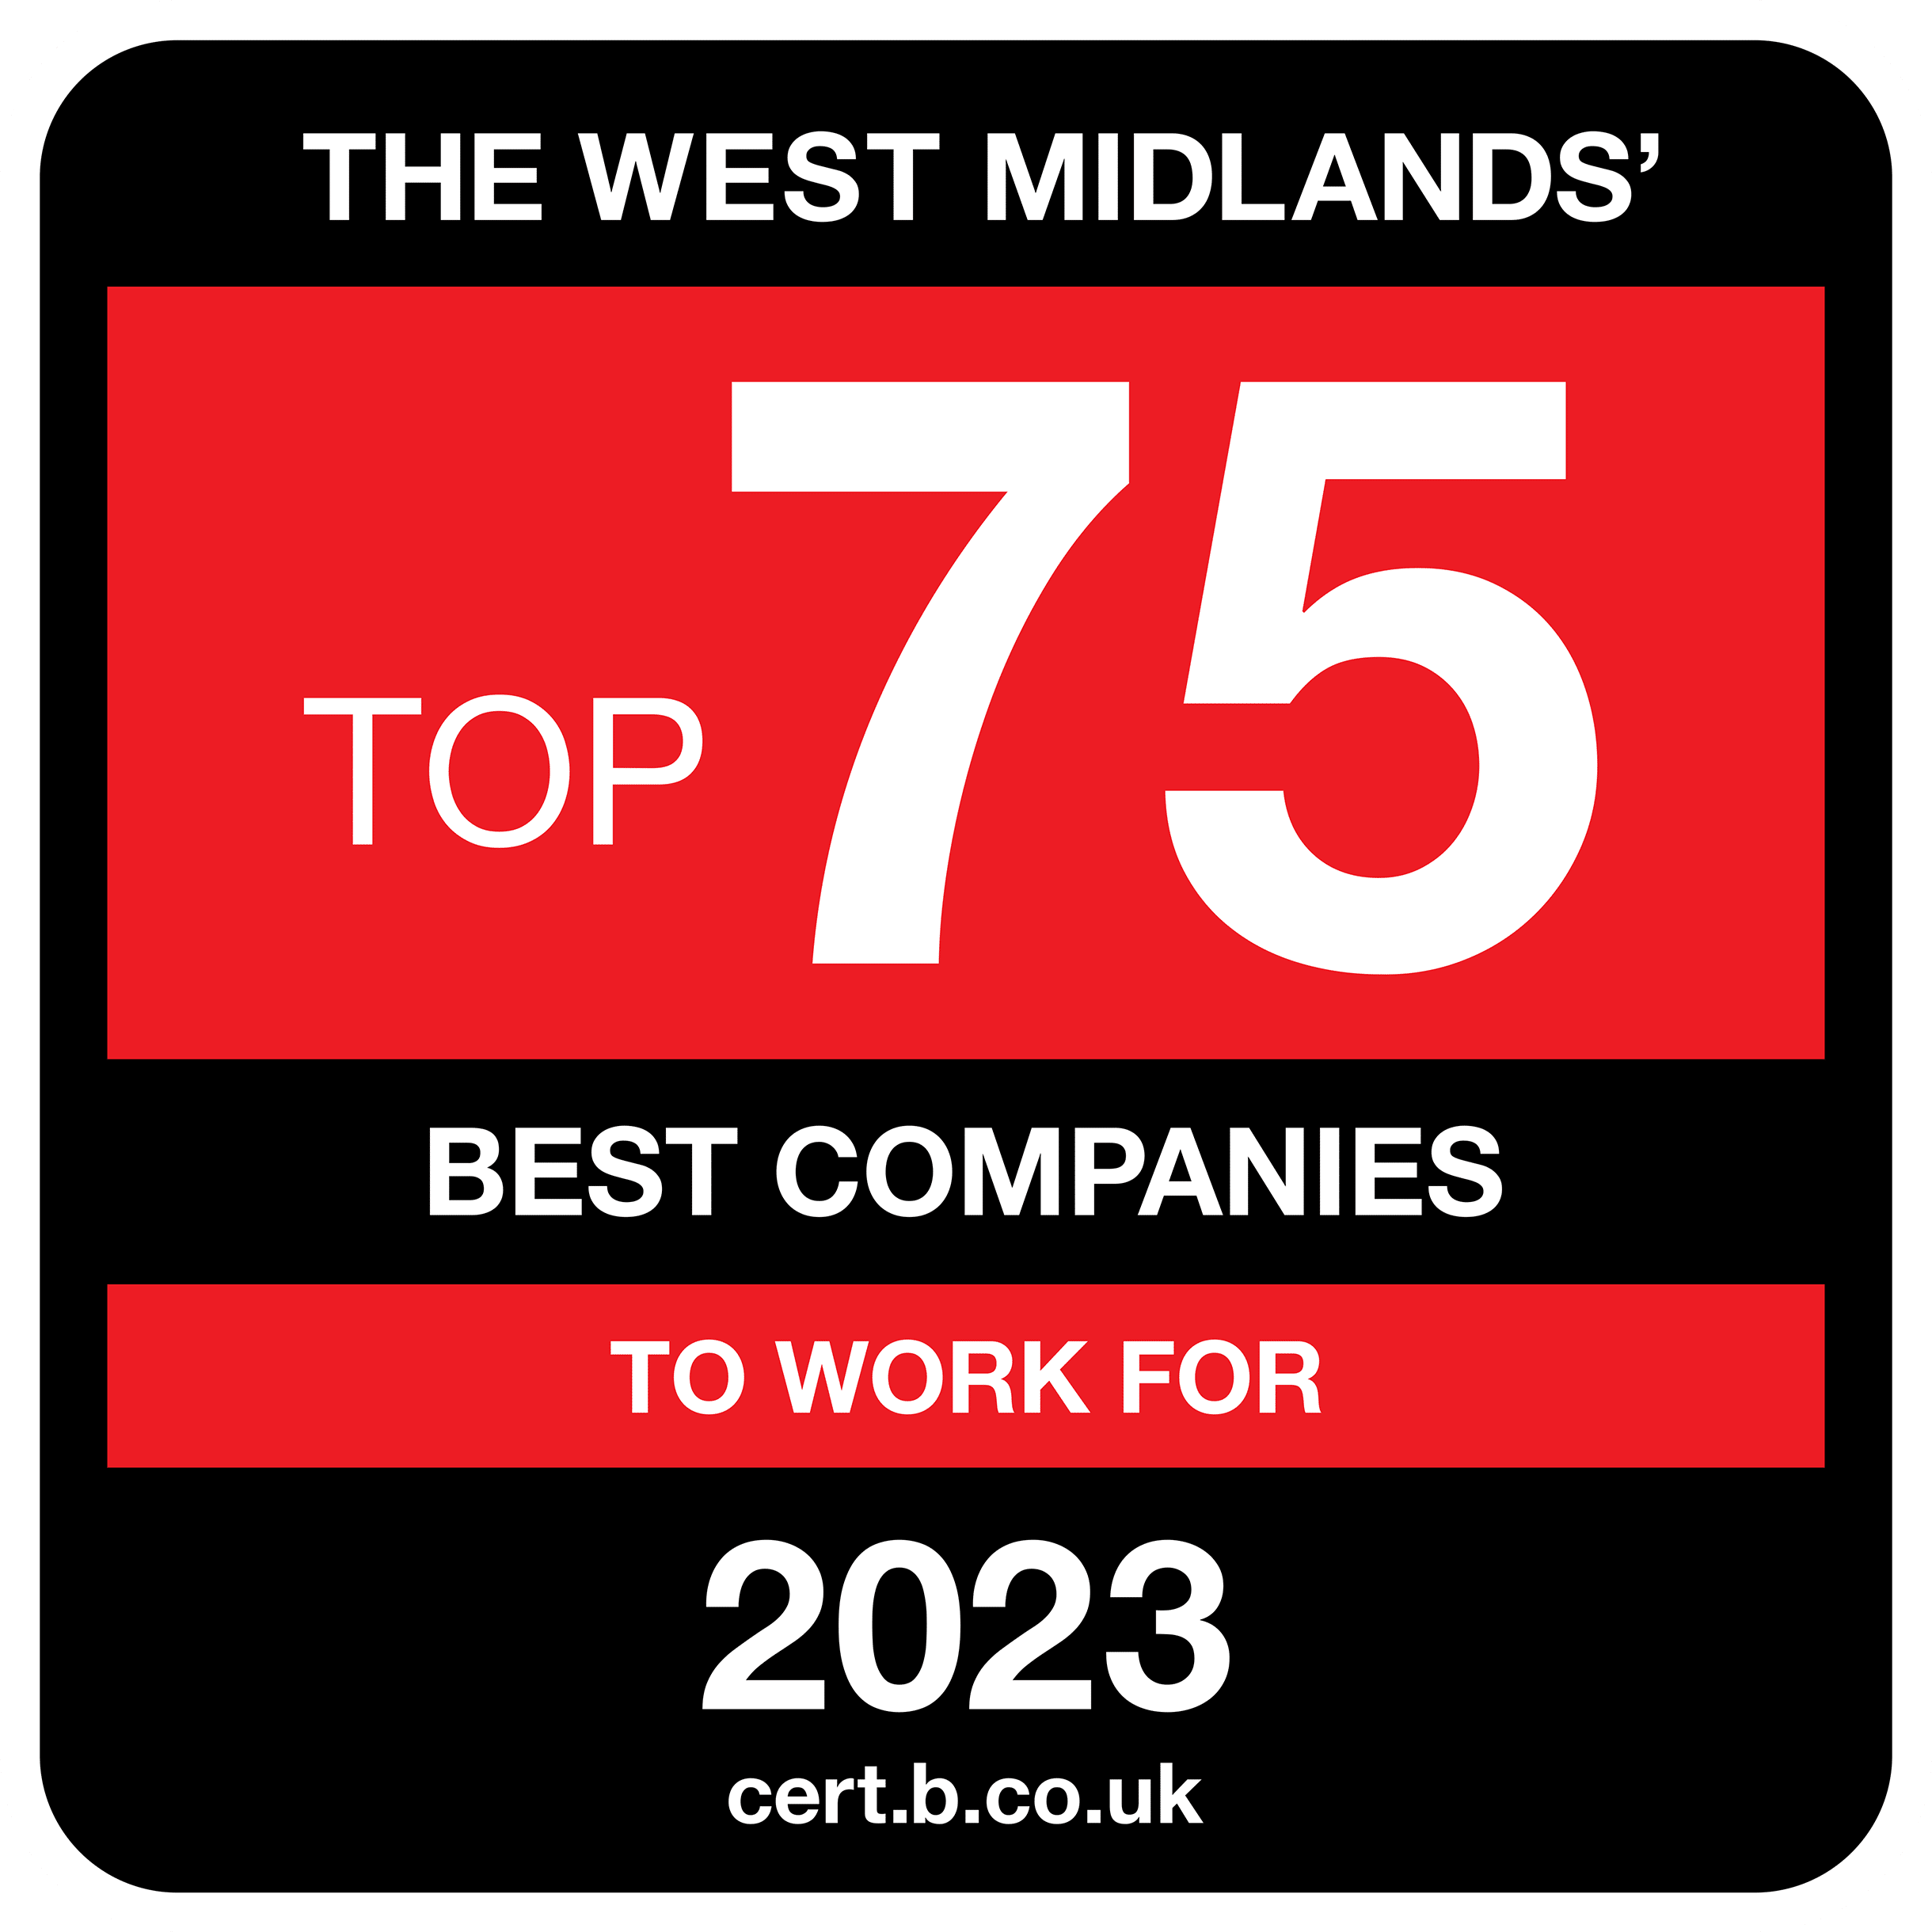 The West Midlands' Best Companies to work for 2023